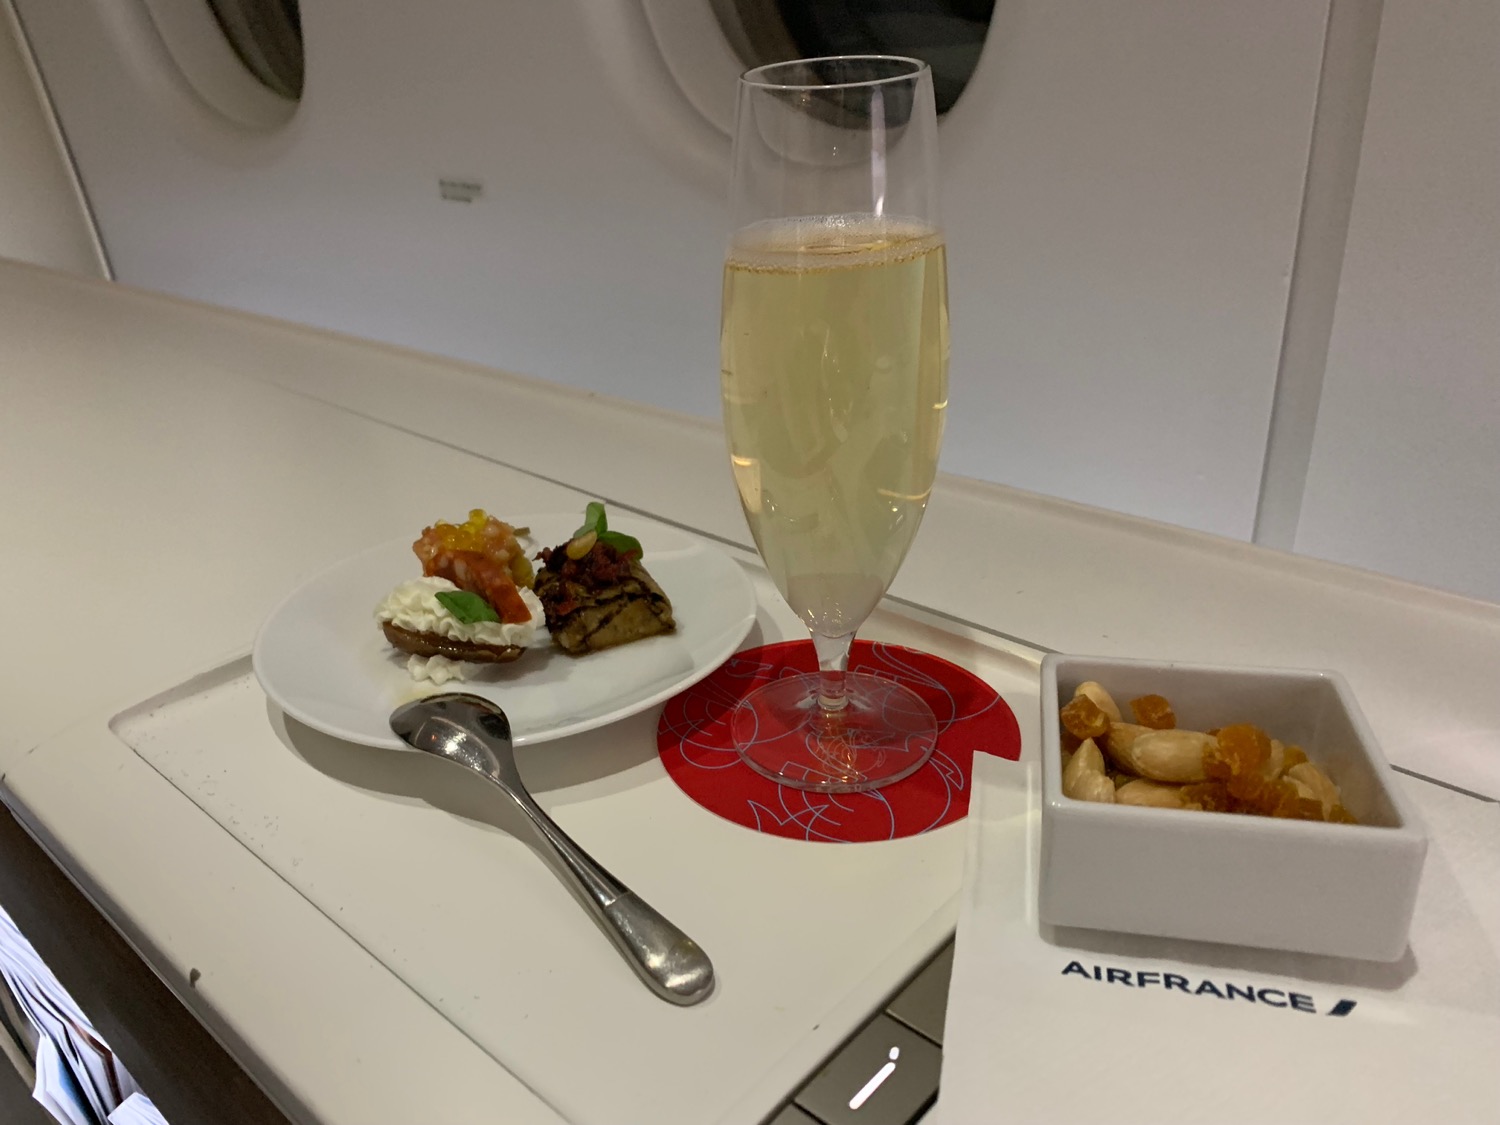 a glass of champagne and food on a plate